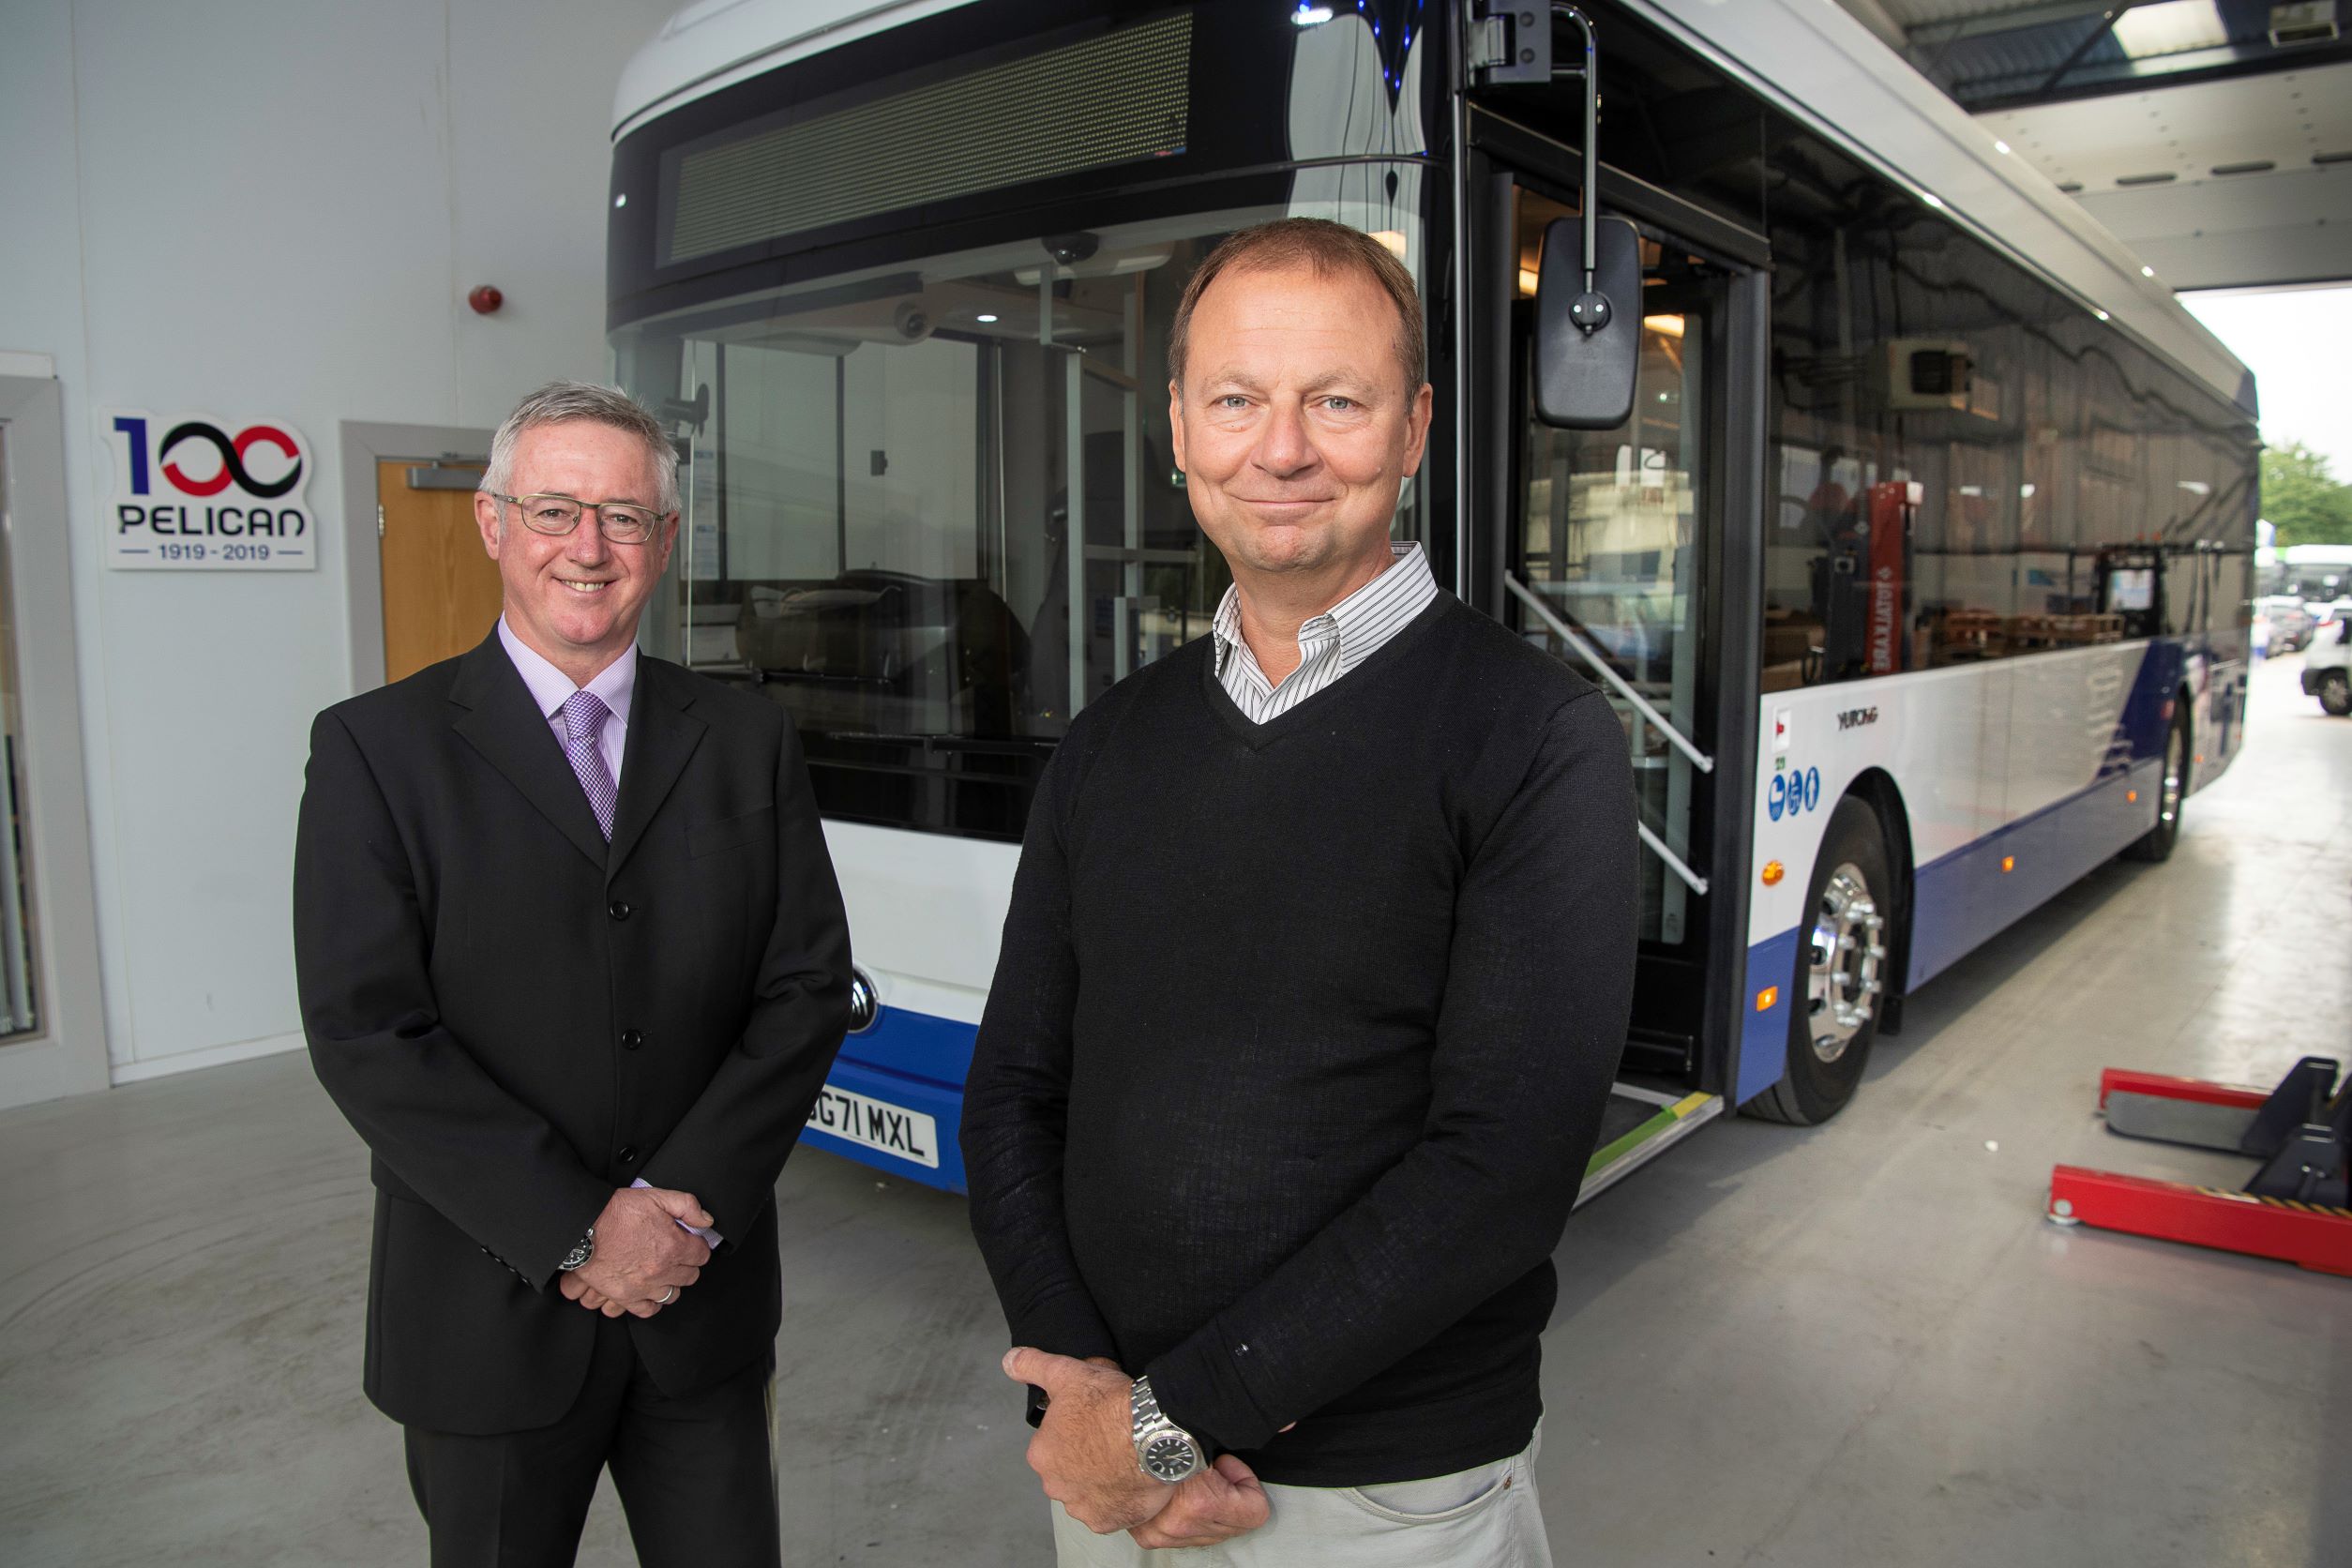 Pelican Bus and Coach MD Richard Crump and Head of Yutong Bus UK Ian Downie